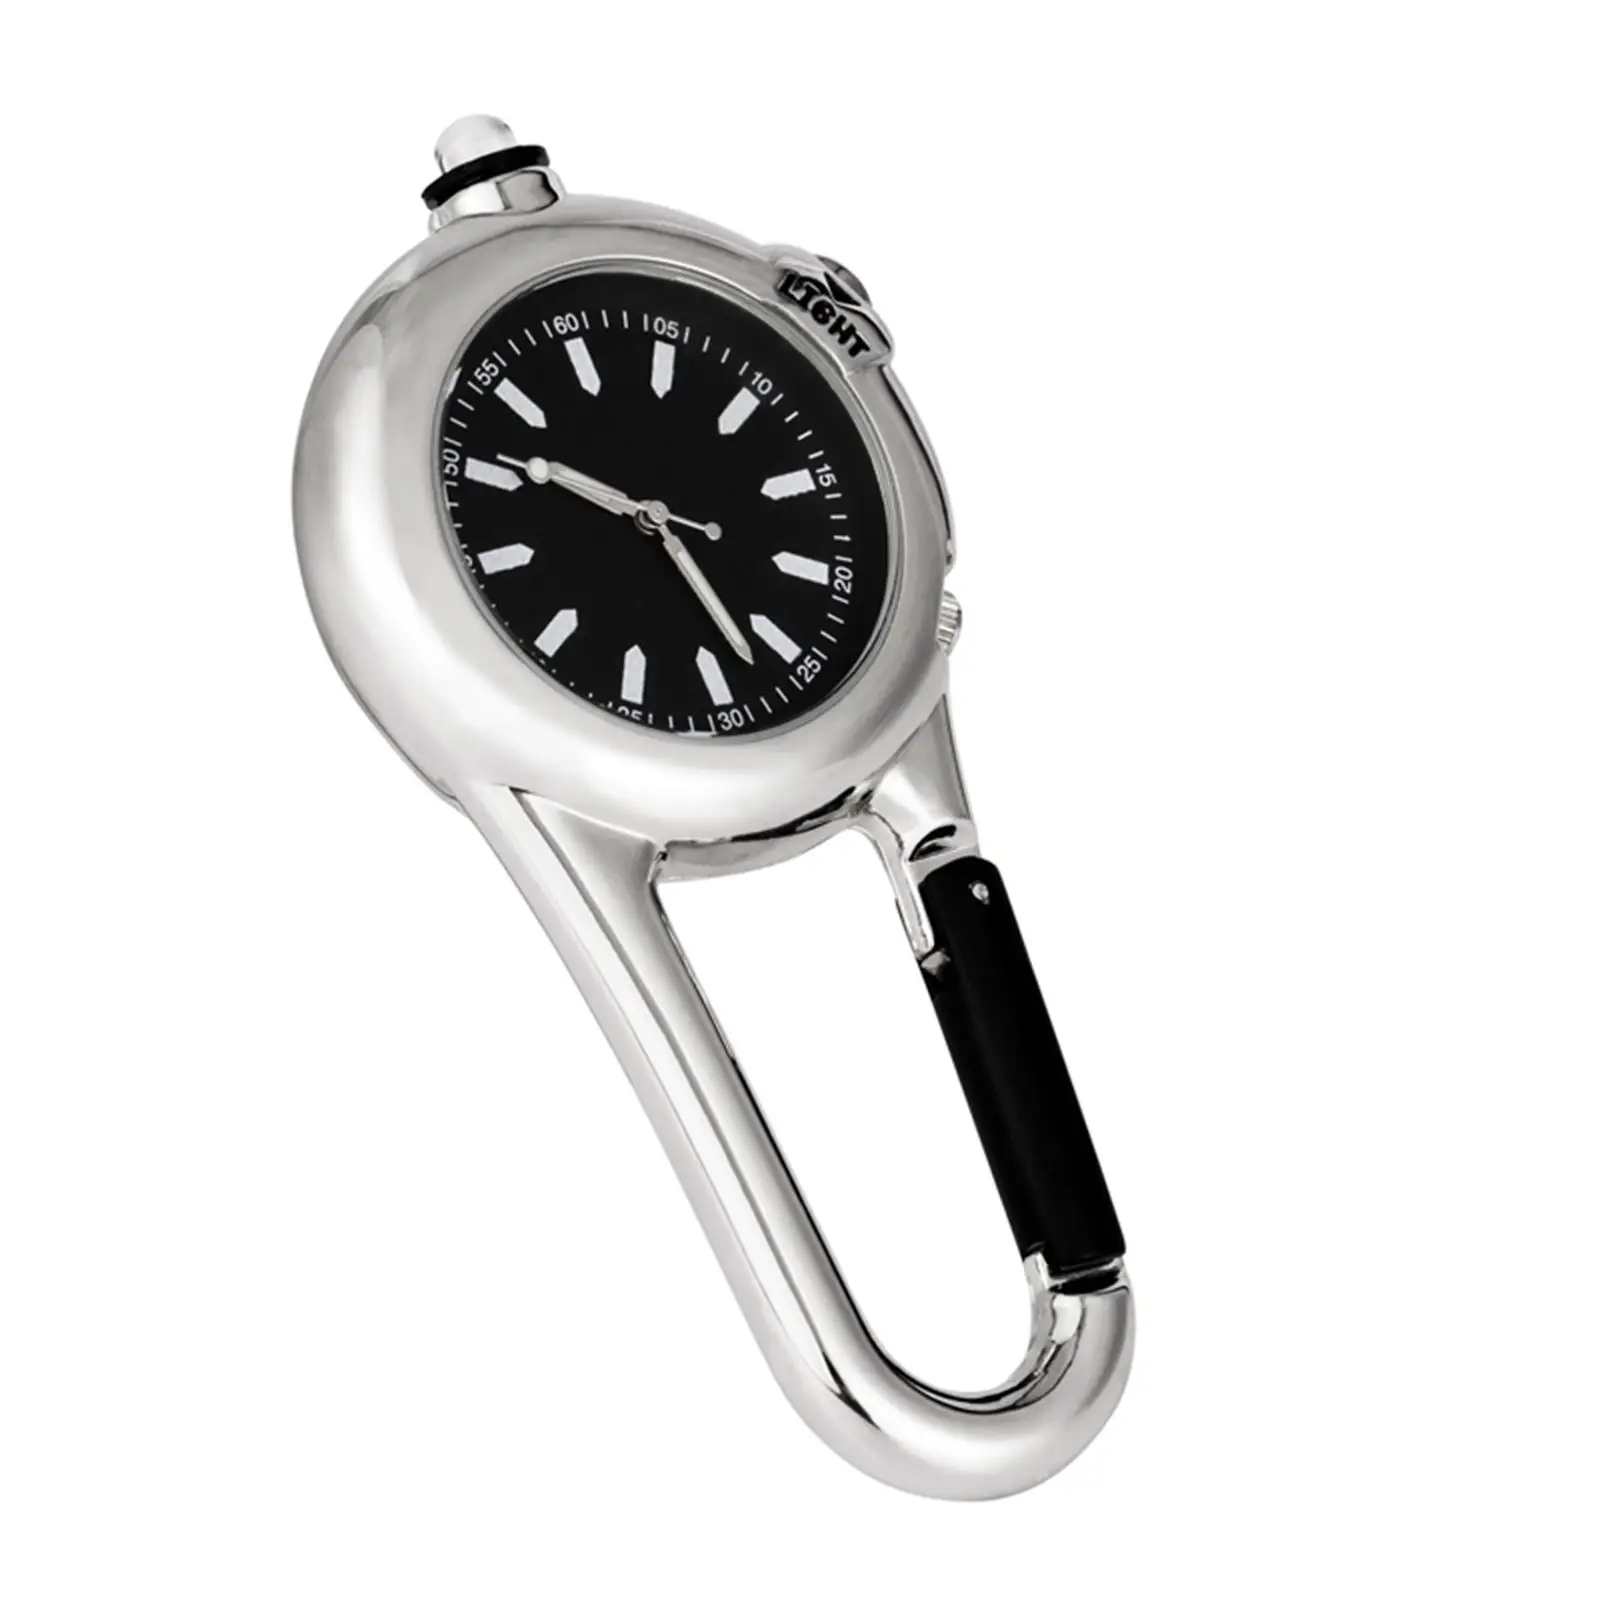 Portable Clip On Carabiner Pocket Watch Backpack Watch Unisex with Light Climbing Watch for Outdoor Camping Home Equipment